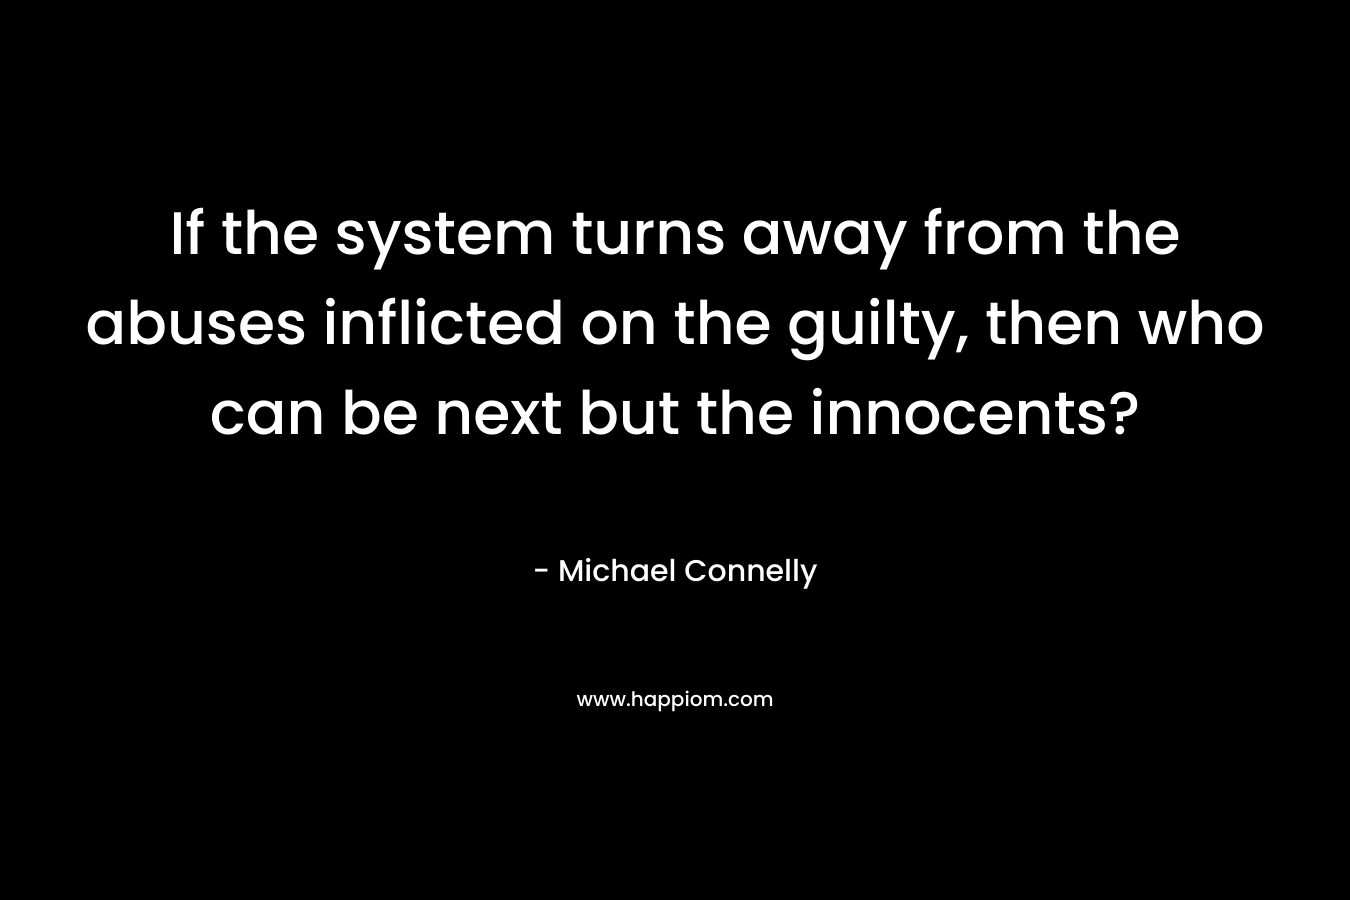 If the system turns away from the abuses inflicted on the guilty, then who can be next but the innocents? – Michael Connelly